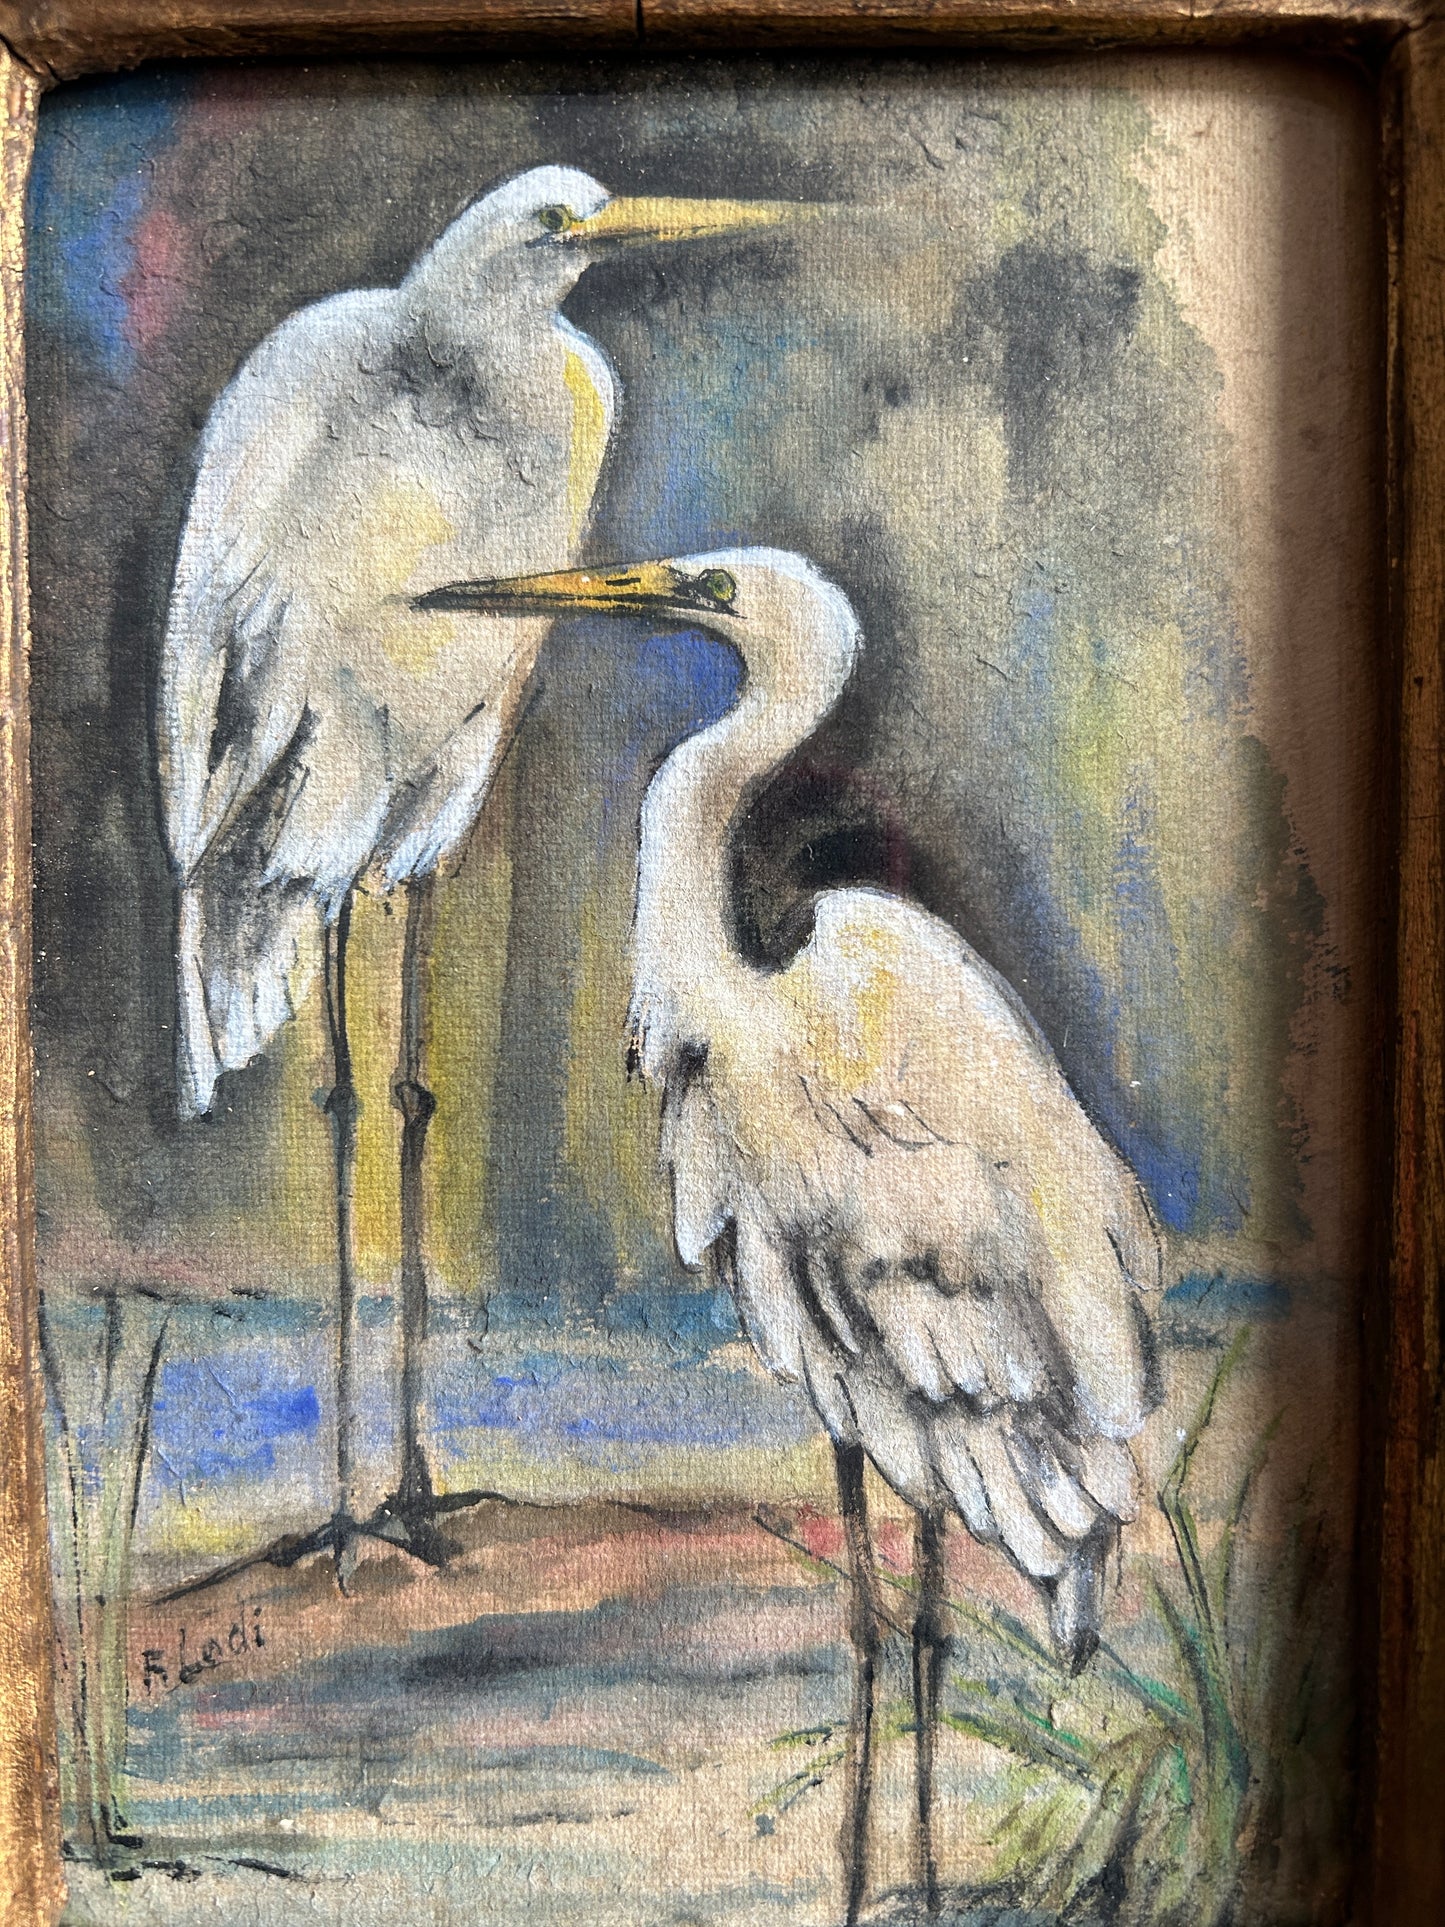 Watercolour of Two Wading Herons in Gilt Frame